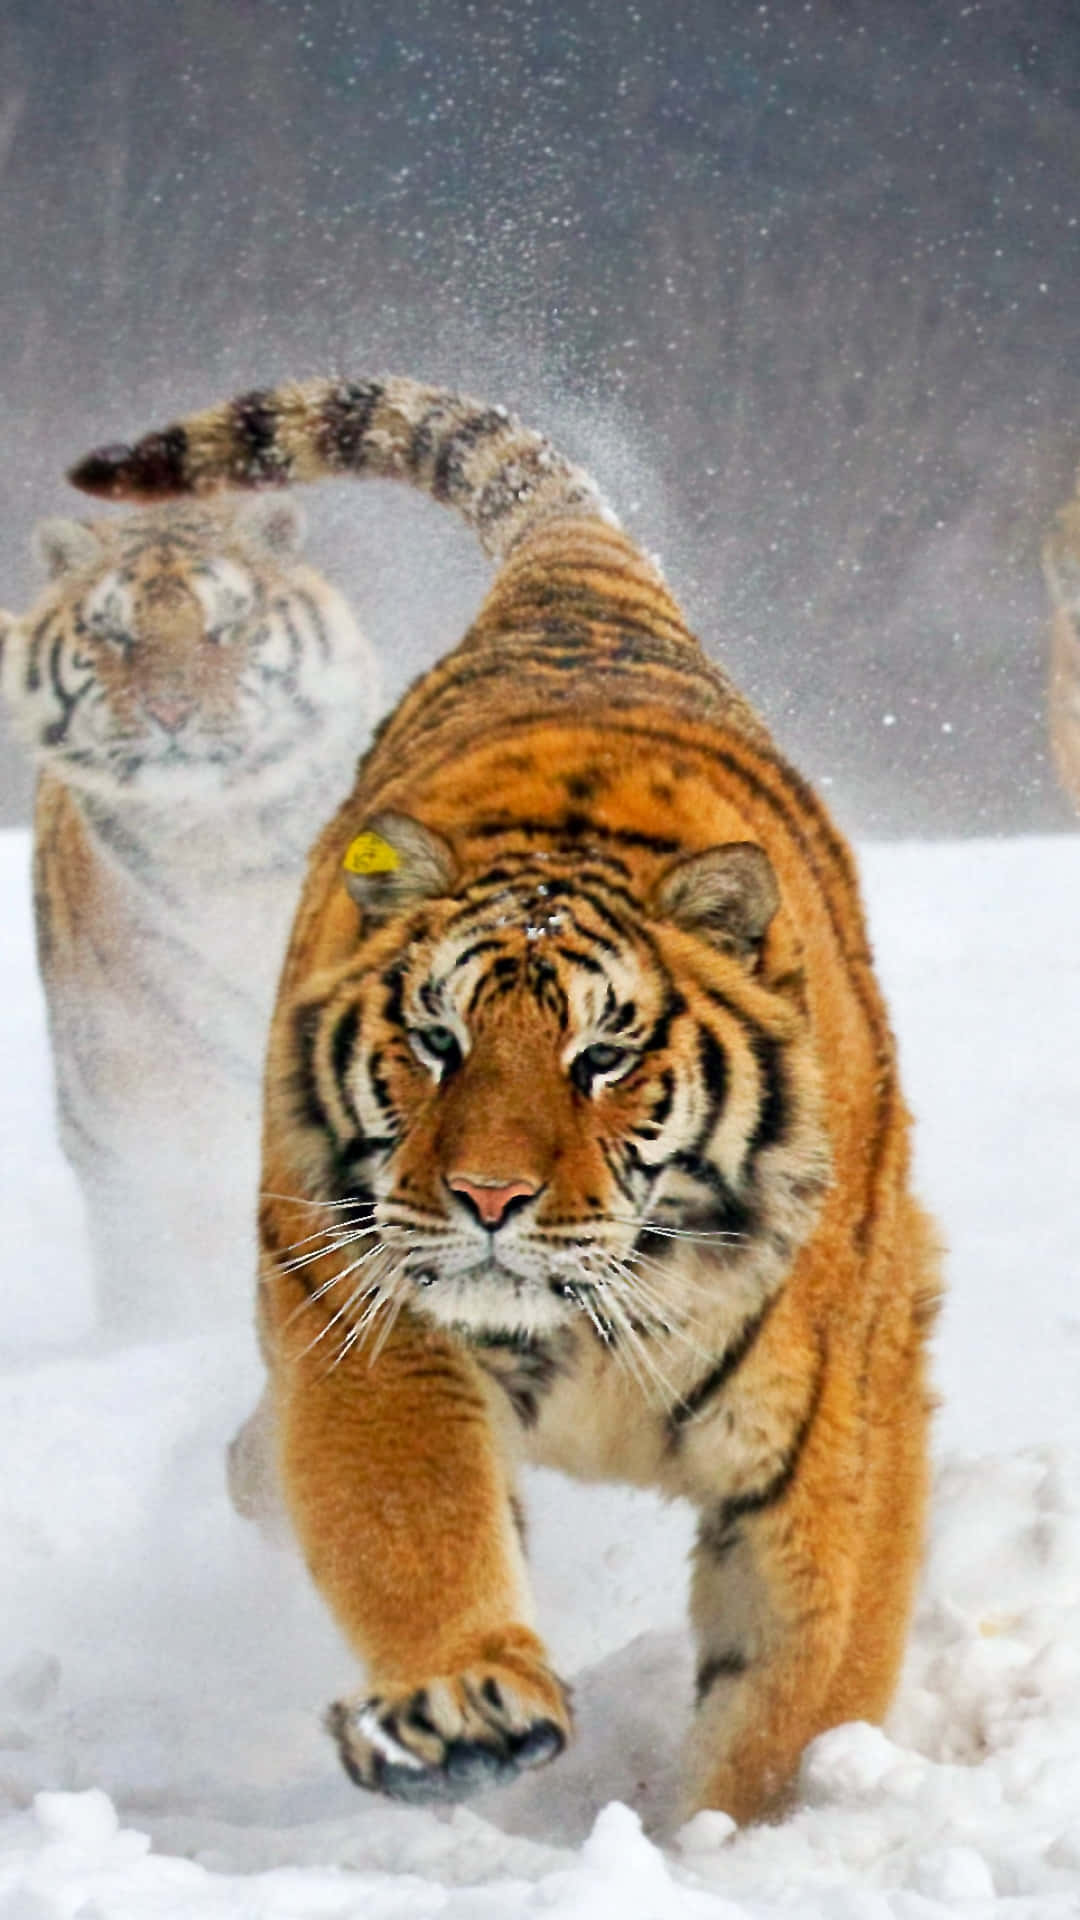 Tiger Running In The Snow With Other Tigers Wallpaper